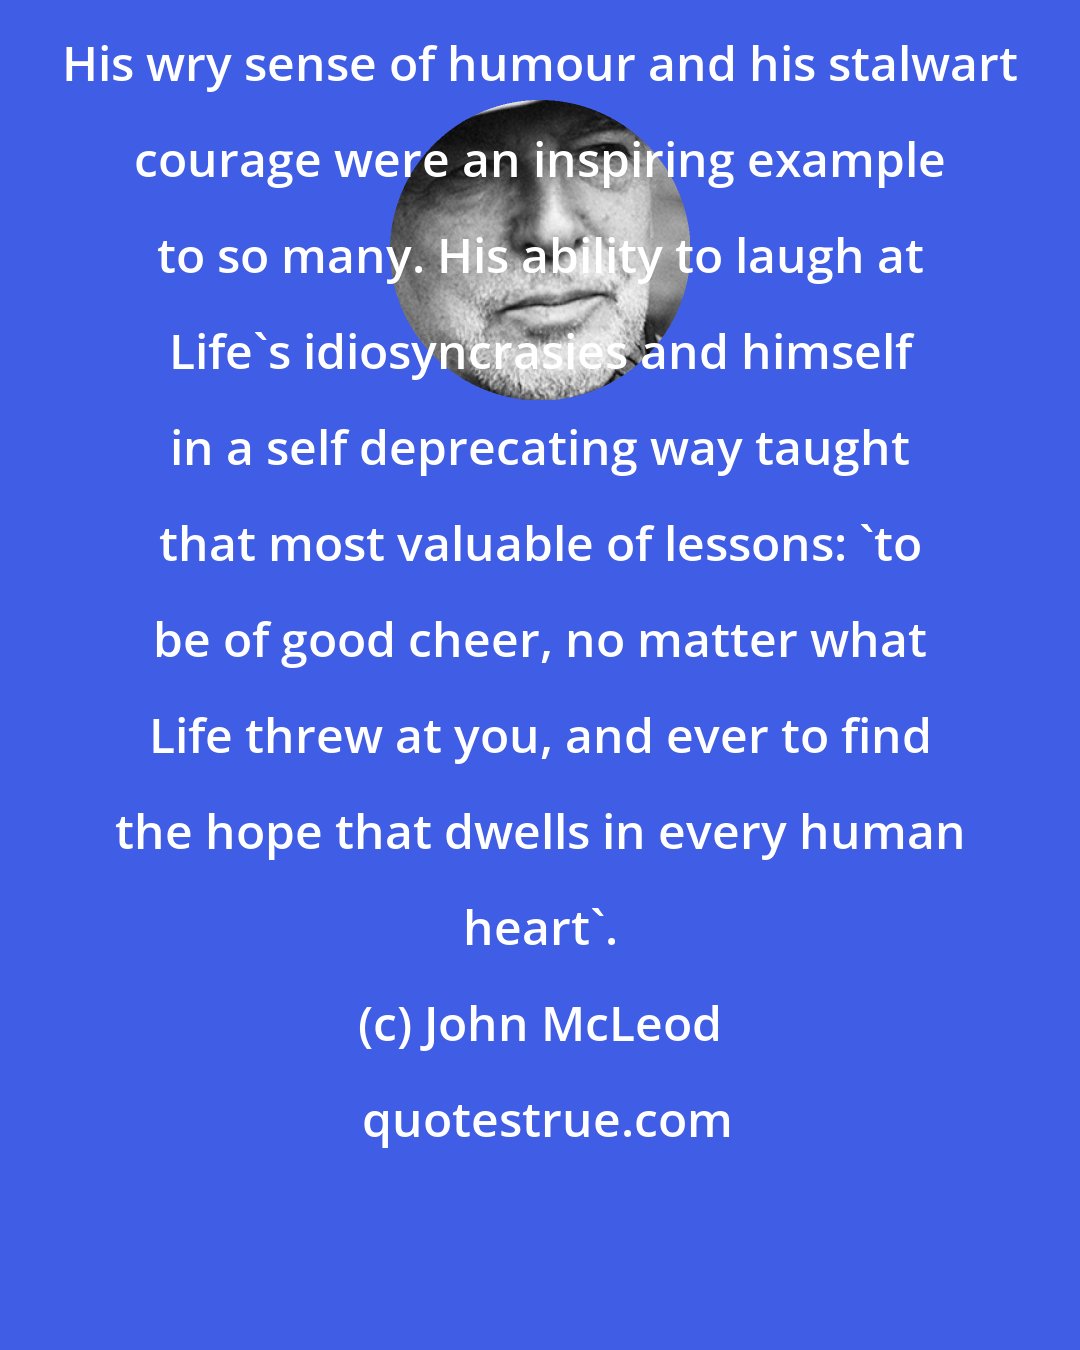 John McLeod: His wry sense of humour and his stalwart courage were an inspiring example to so many. His ability to laugh at Life's idiosyncrasies and himself in a self deprecating way taught that most valuable of lessons: 'to be of good cheer, no matter what Life threw at you, and ever to find the hope that dwells in every human heart'.